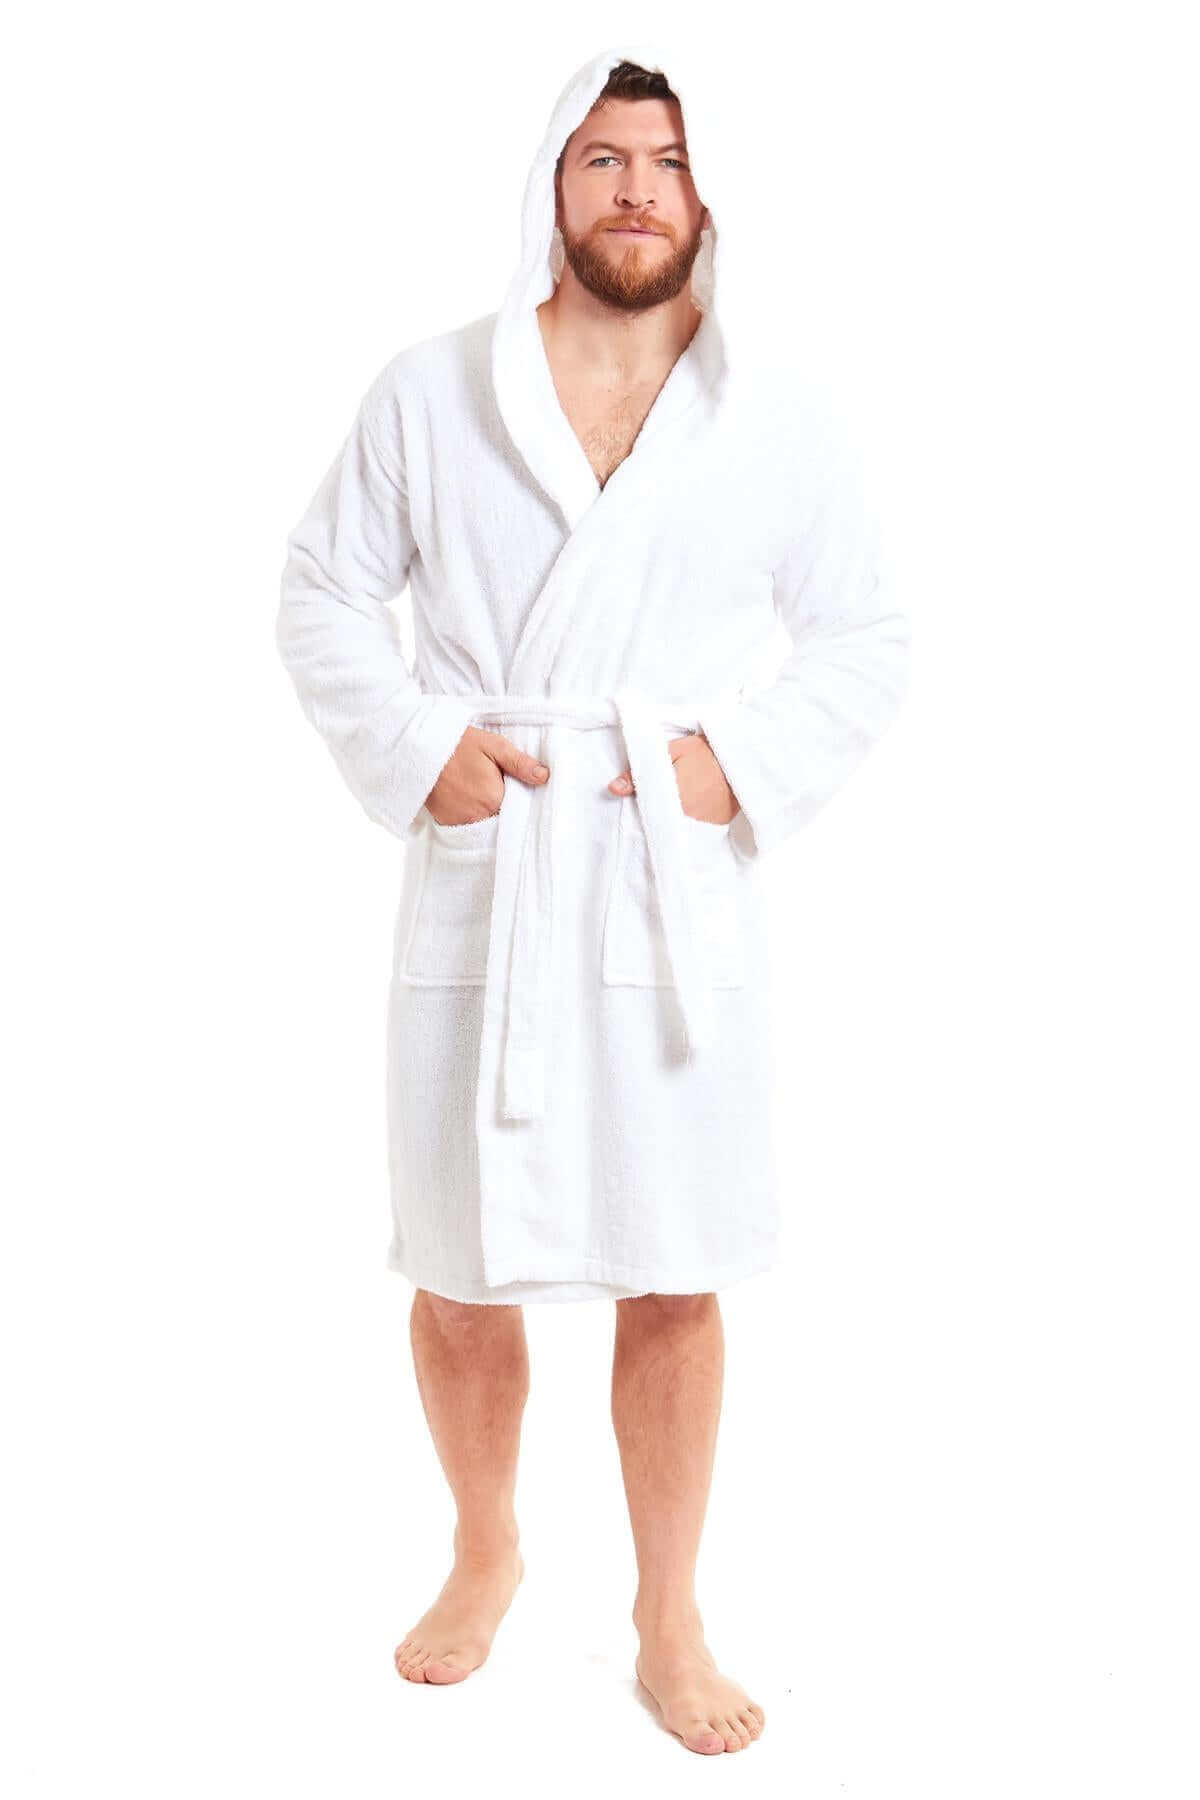 Men's Bamboo Hooded Dressing Gown Towelling Bath Robes. Buy now for £20.00. A Robe by Toro Rocco. 12-14, 16-18, 20-22, bamboo, bathrobe, bathwrap, boys, cuddly, dressing, dressing gown, elasticated, gowns, grey, gym, home, hooded, hotel, housecoat, large,